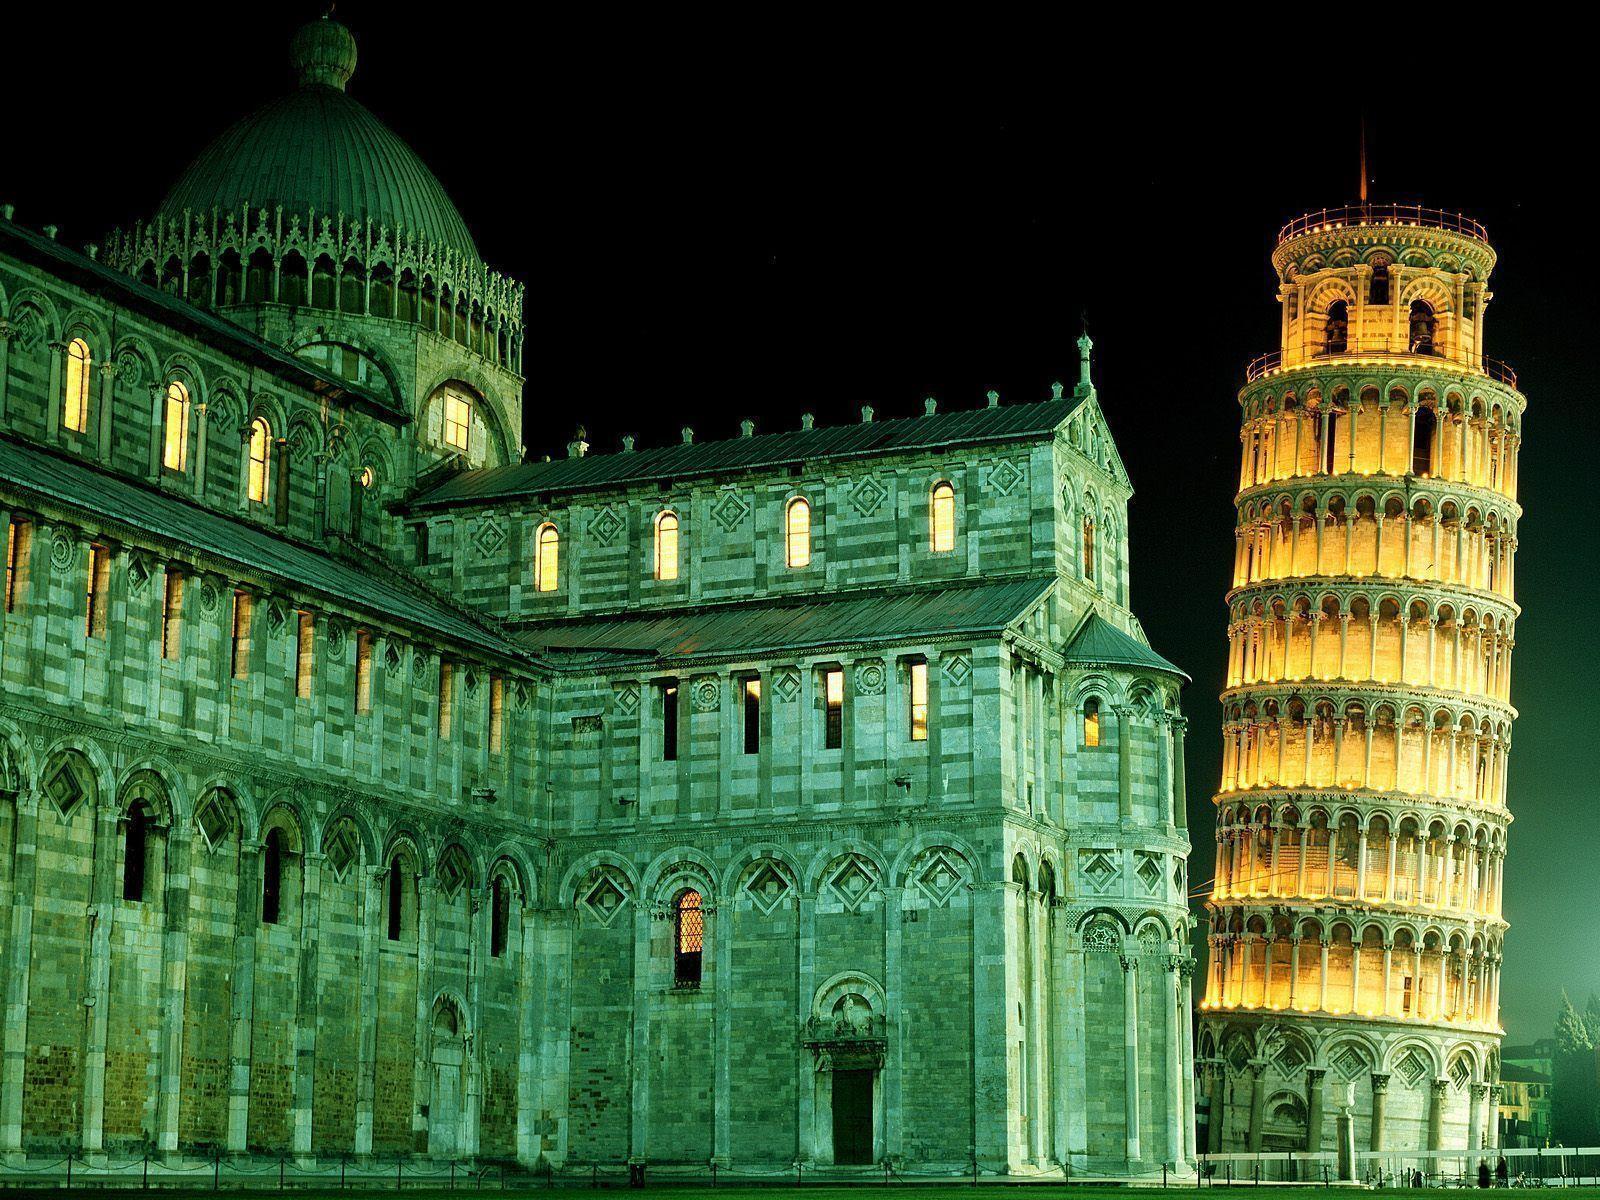 Leaning Tower in Pisa (Italy) / 1600 x 1200 / Locality